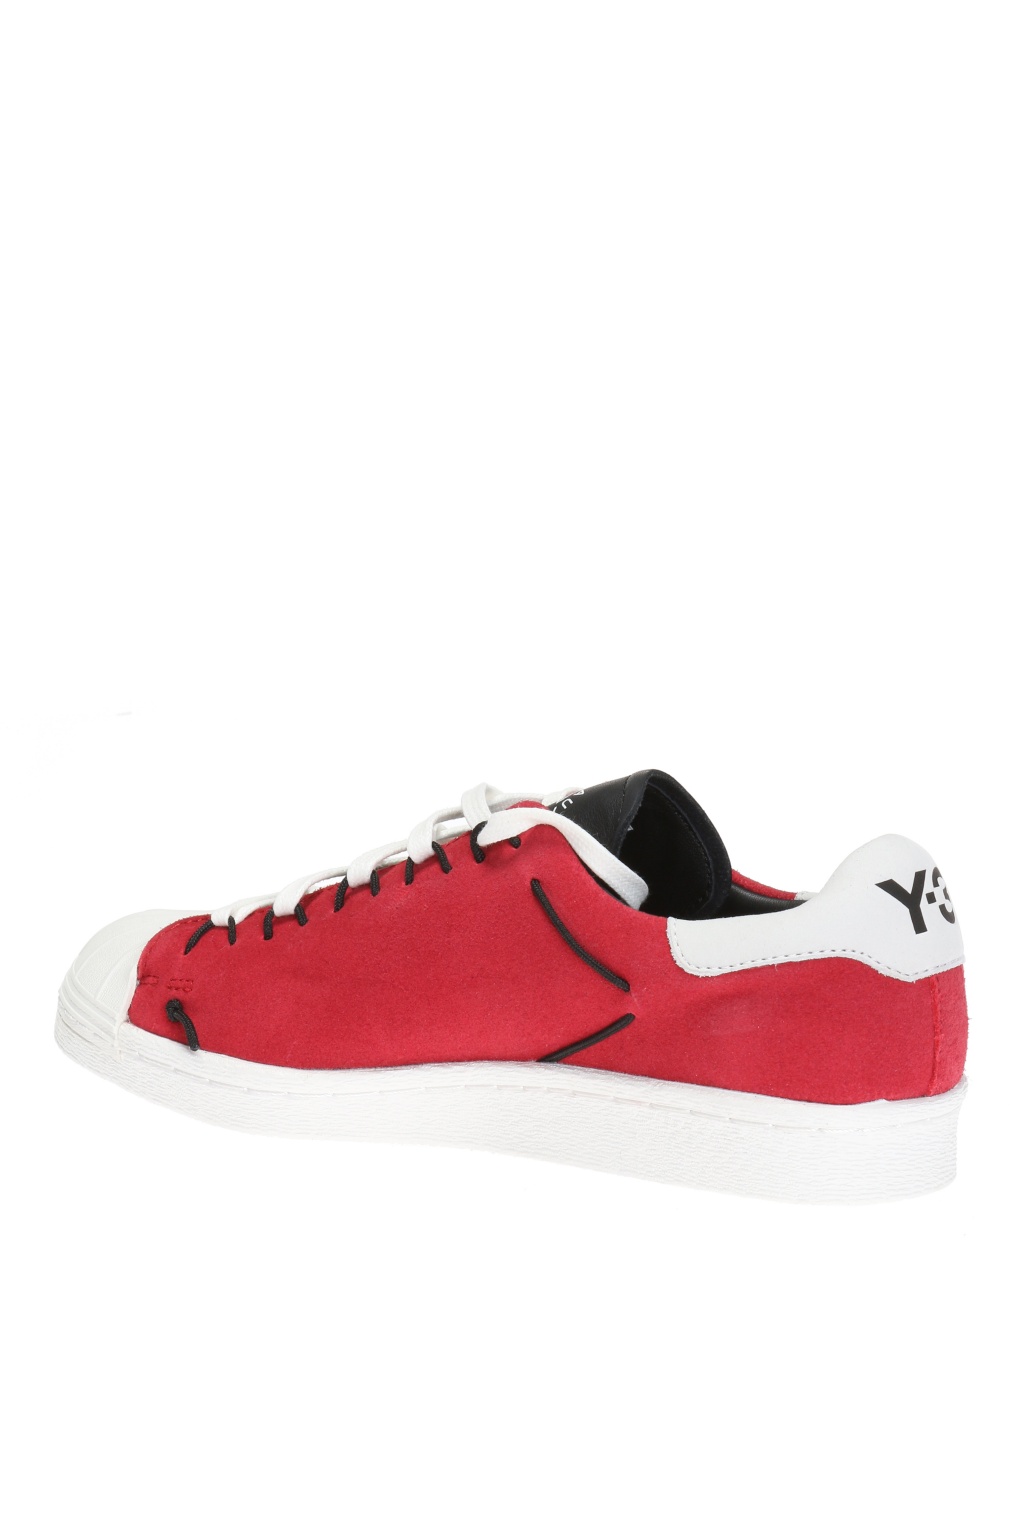 y3 super knot trainers